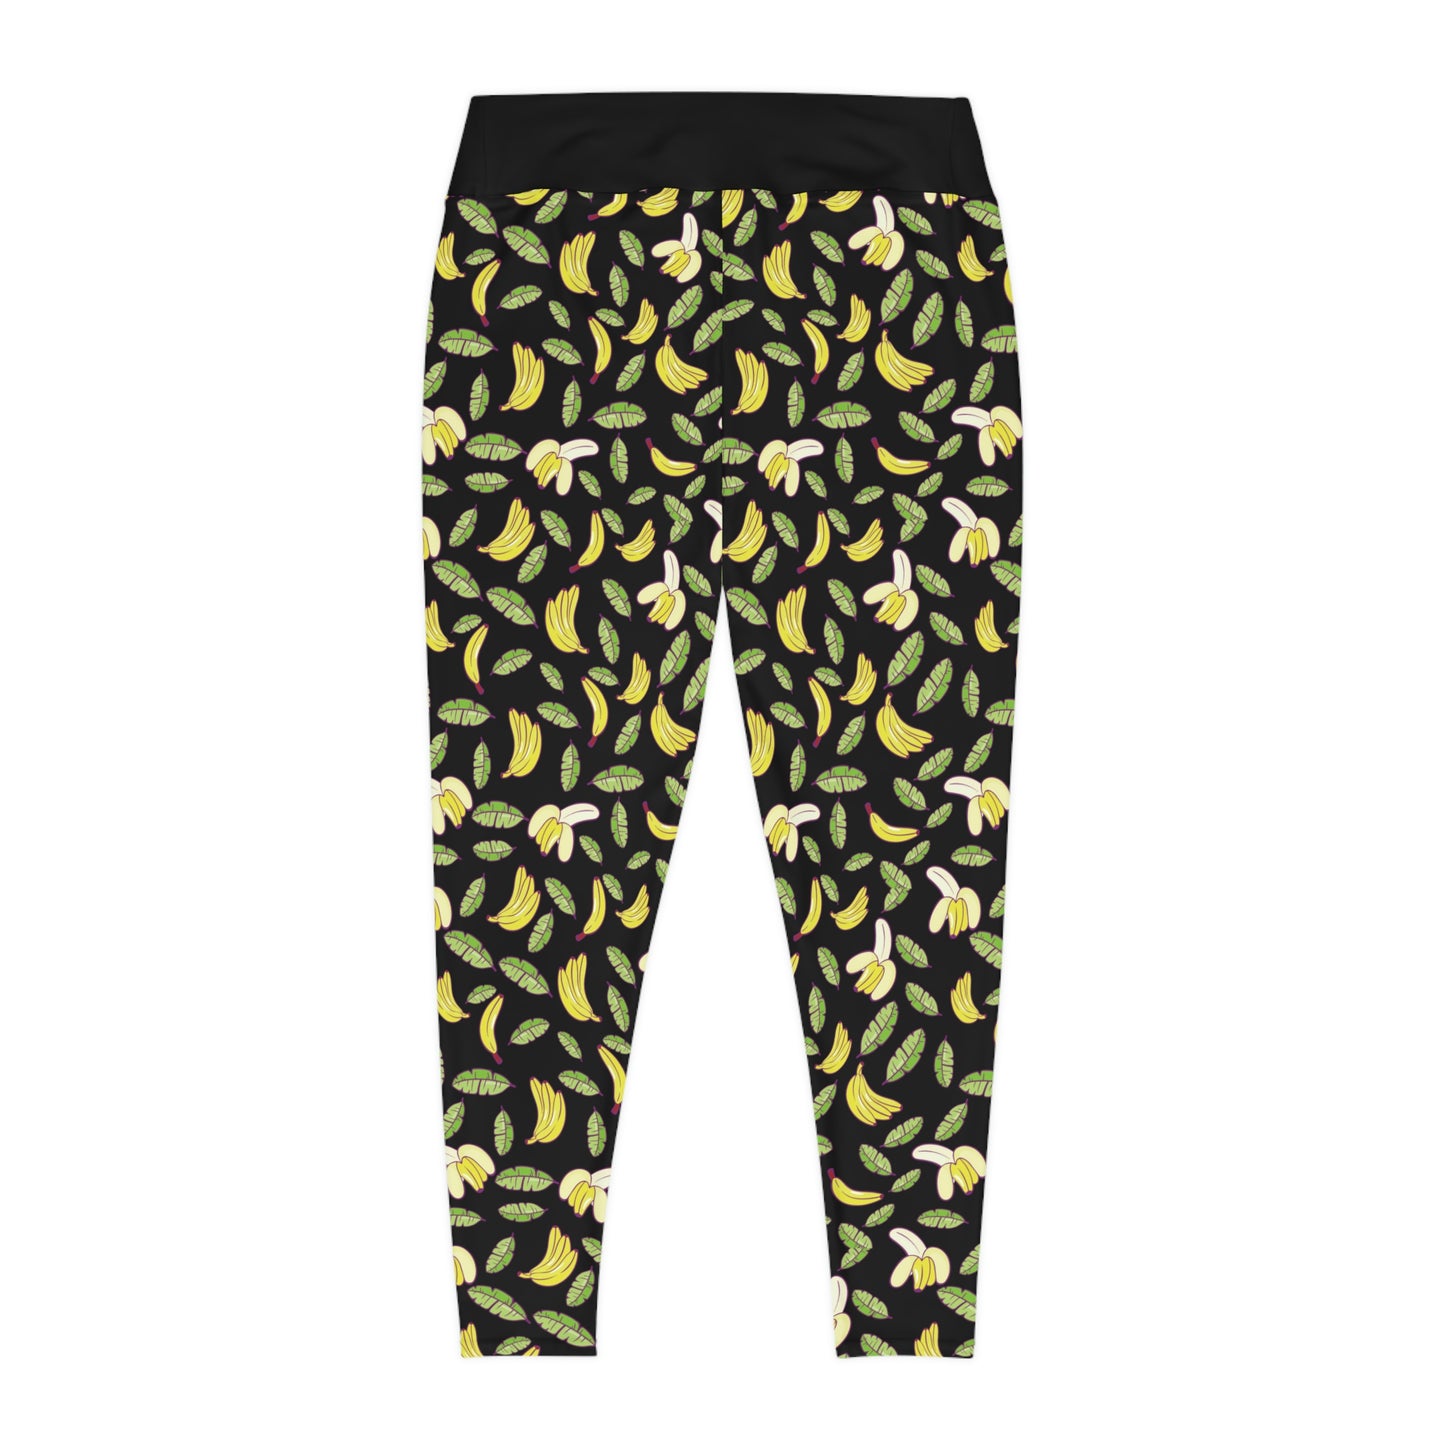 Banana Fruit Plus Size Leggings One of a Kind Gift - Unique Workout Activewear tights for Mom fitness, Mothers Day, Girlfriend Christmas Gift